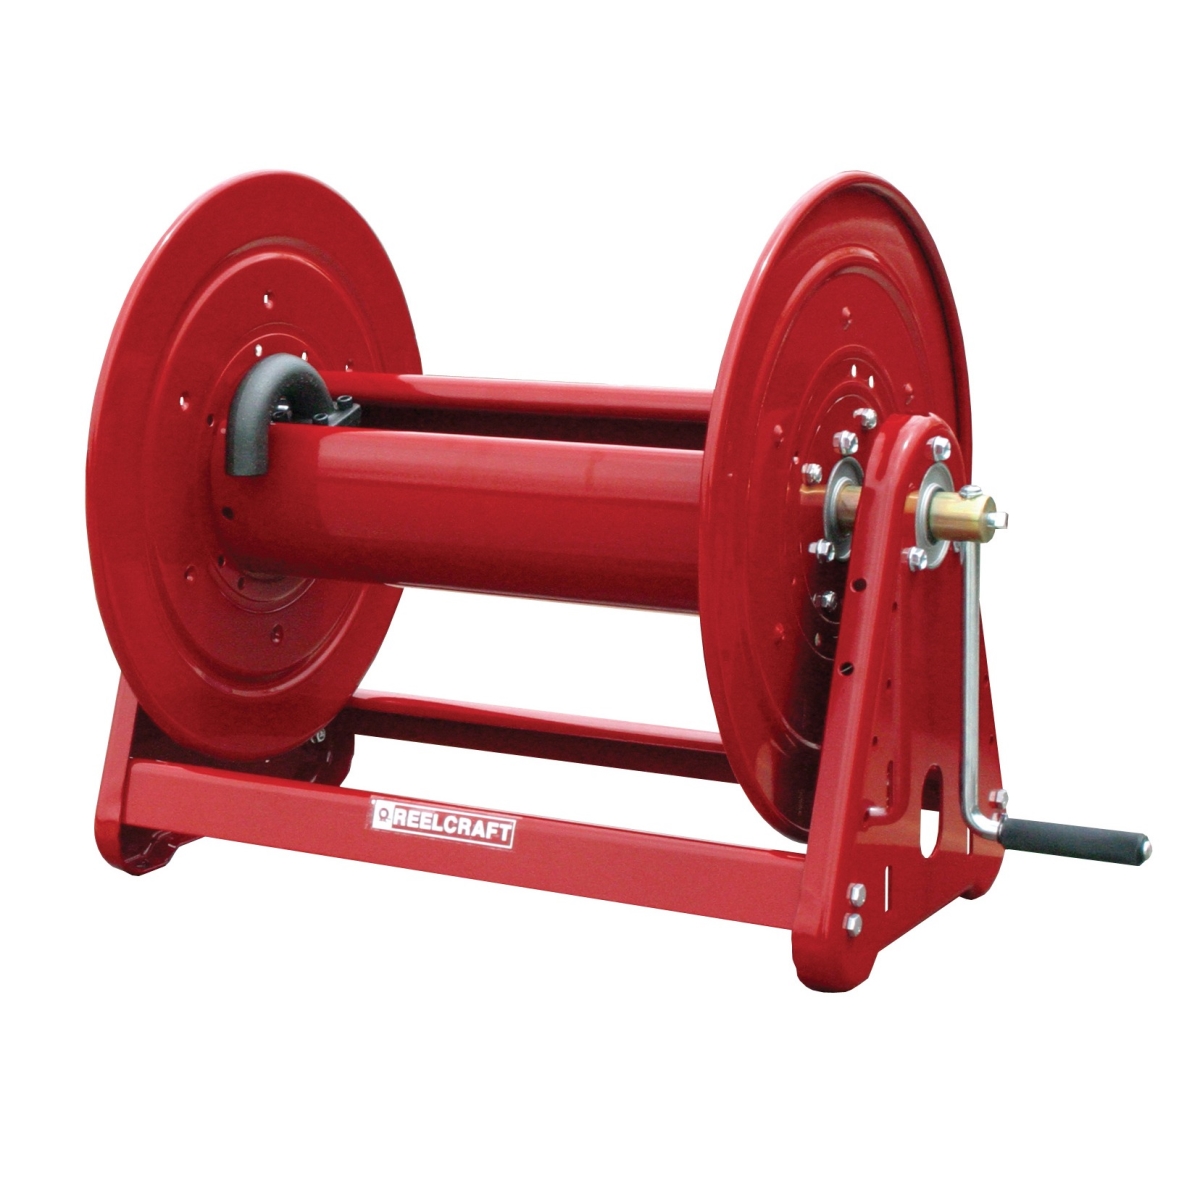 Ca32118 L 0.5 In. X 325 Ft. Heavy Duty 1000 Psi Hand Crank Without Hose Reel, Red